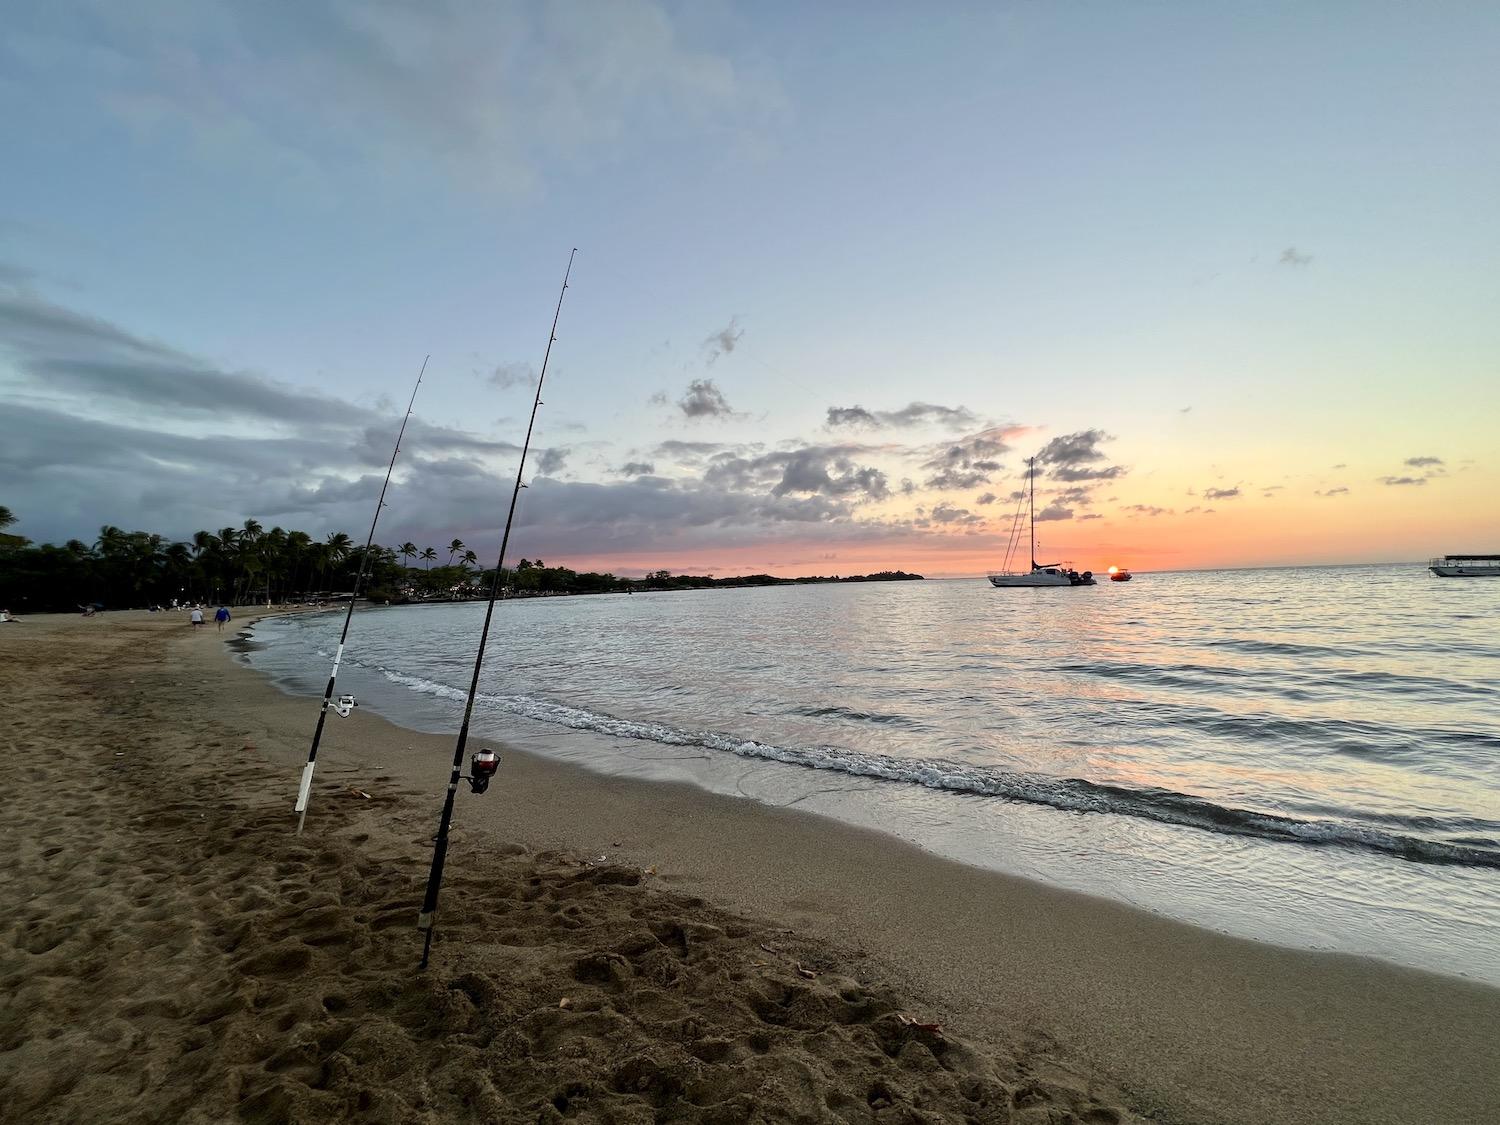 FFishing at sunset in ʻAnaehoʻomalu Bay by the Waikoloa Beach Marriott Resort and Spa.